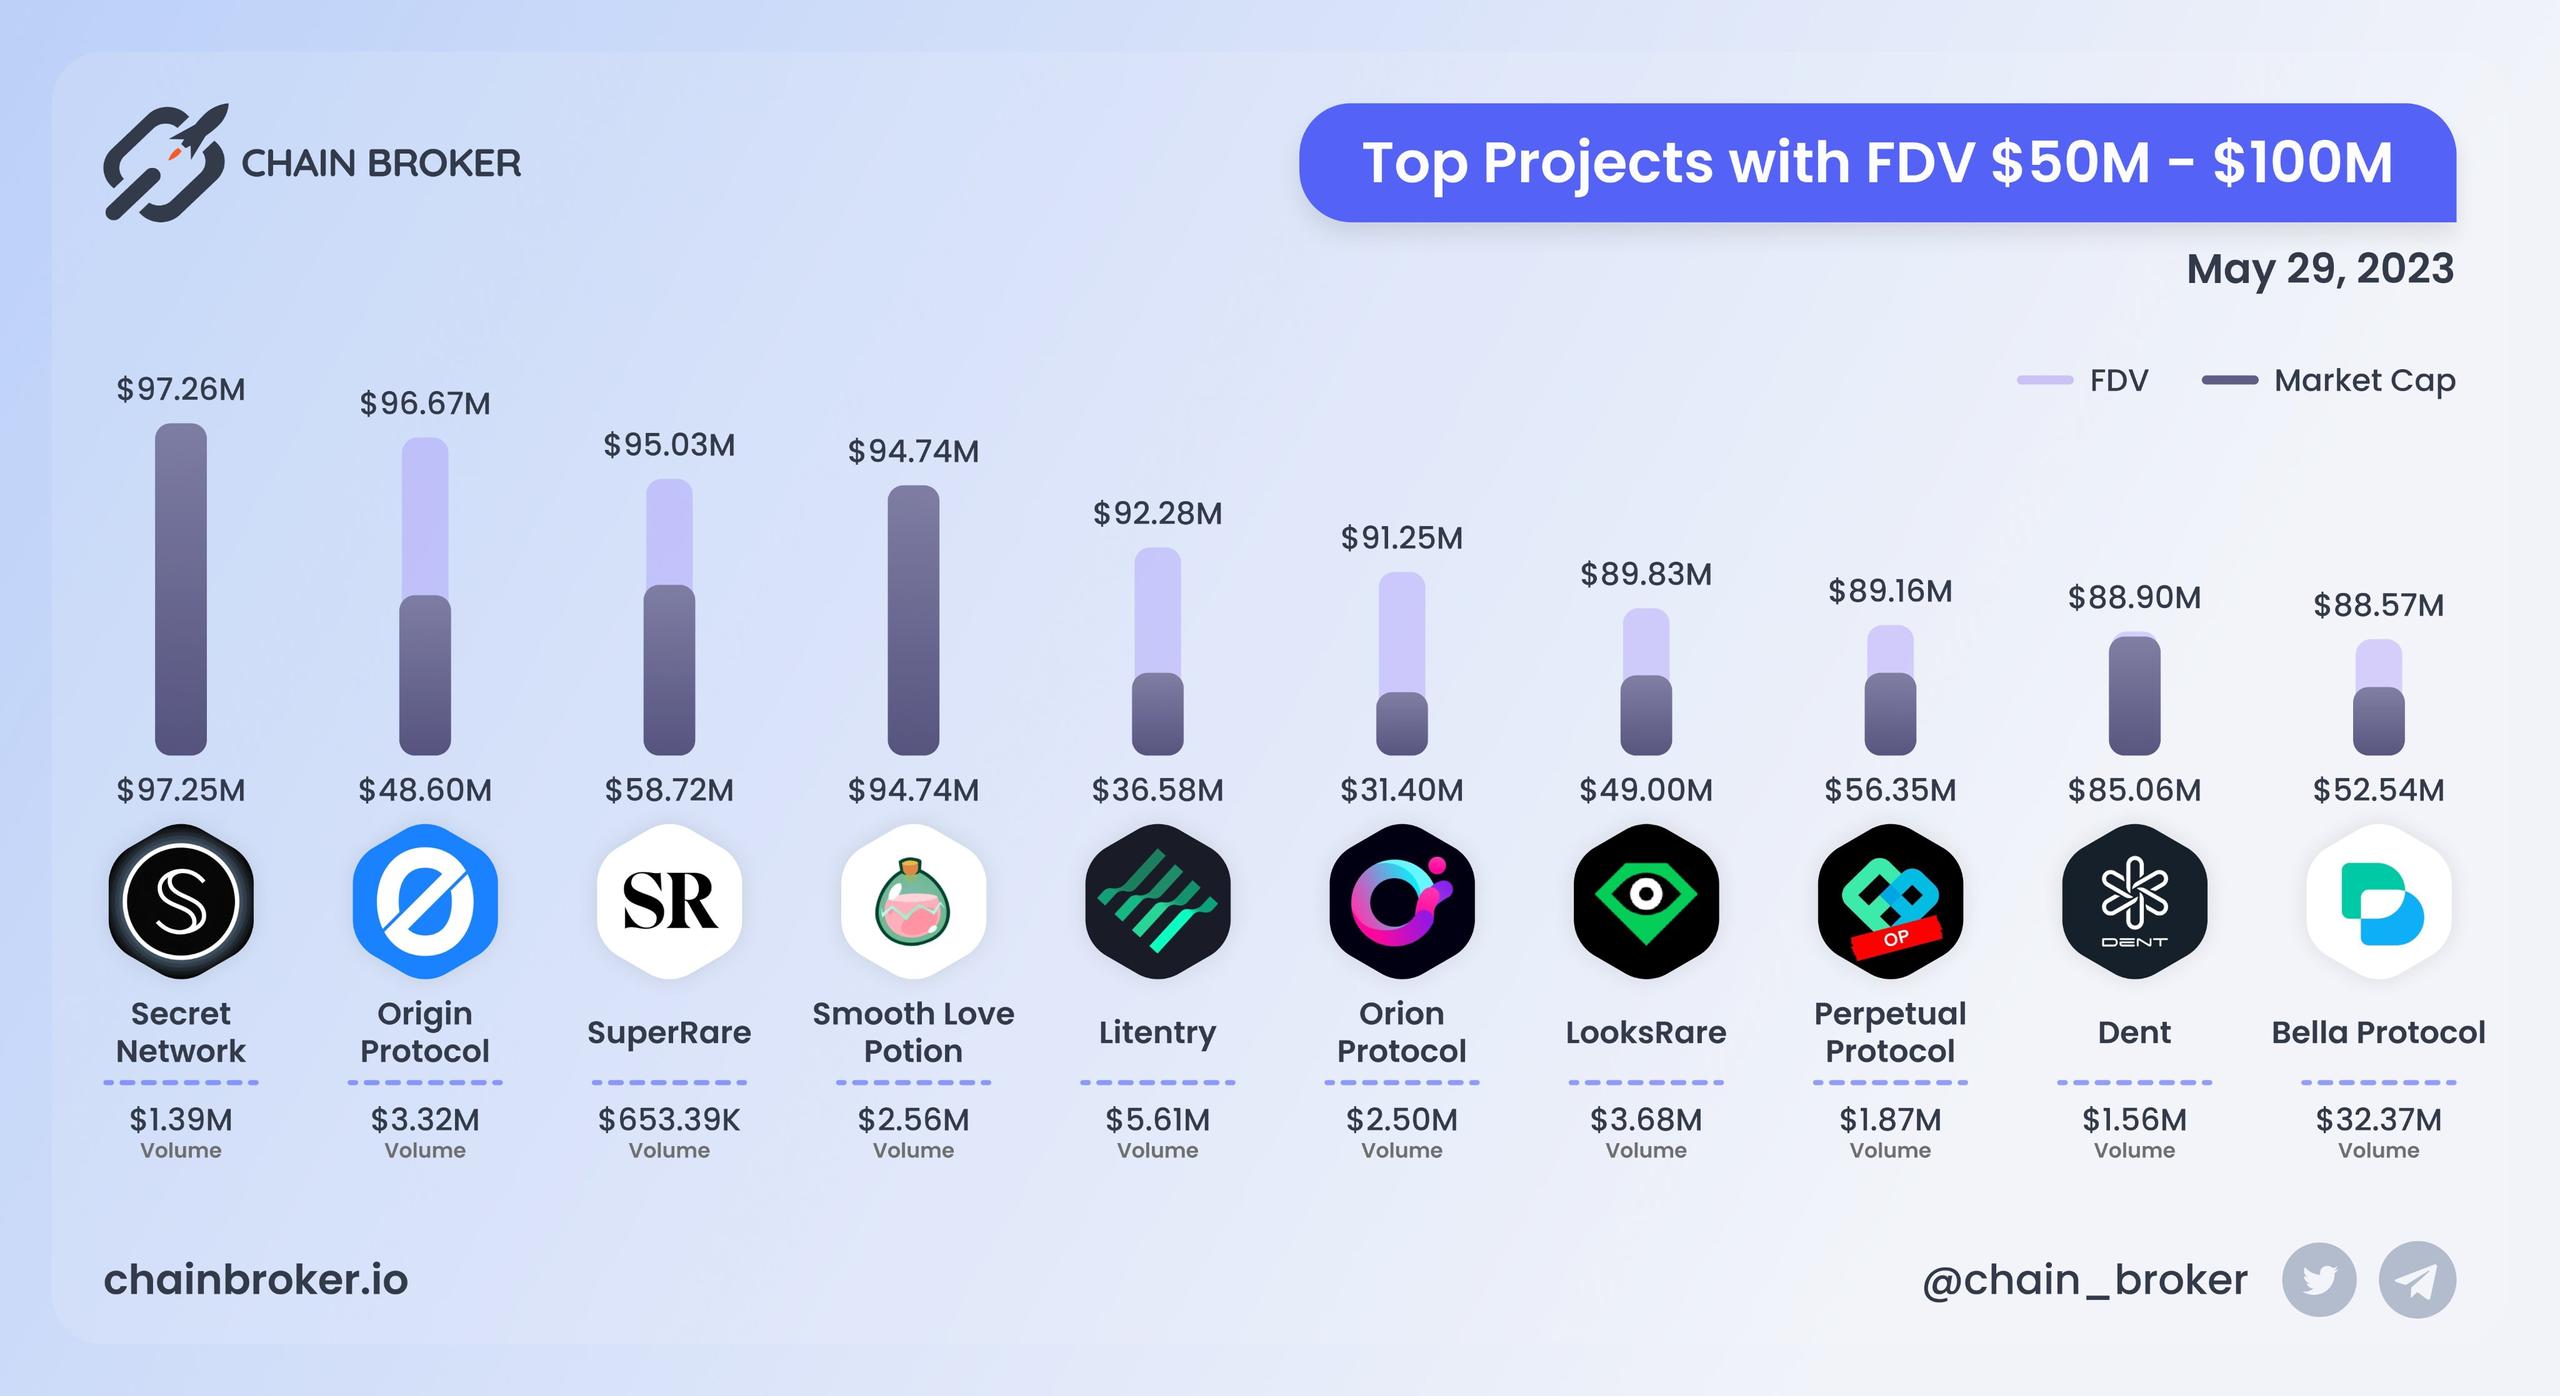 Top projects with FDV $50M - $100M